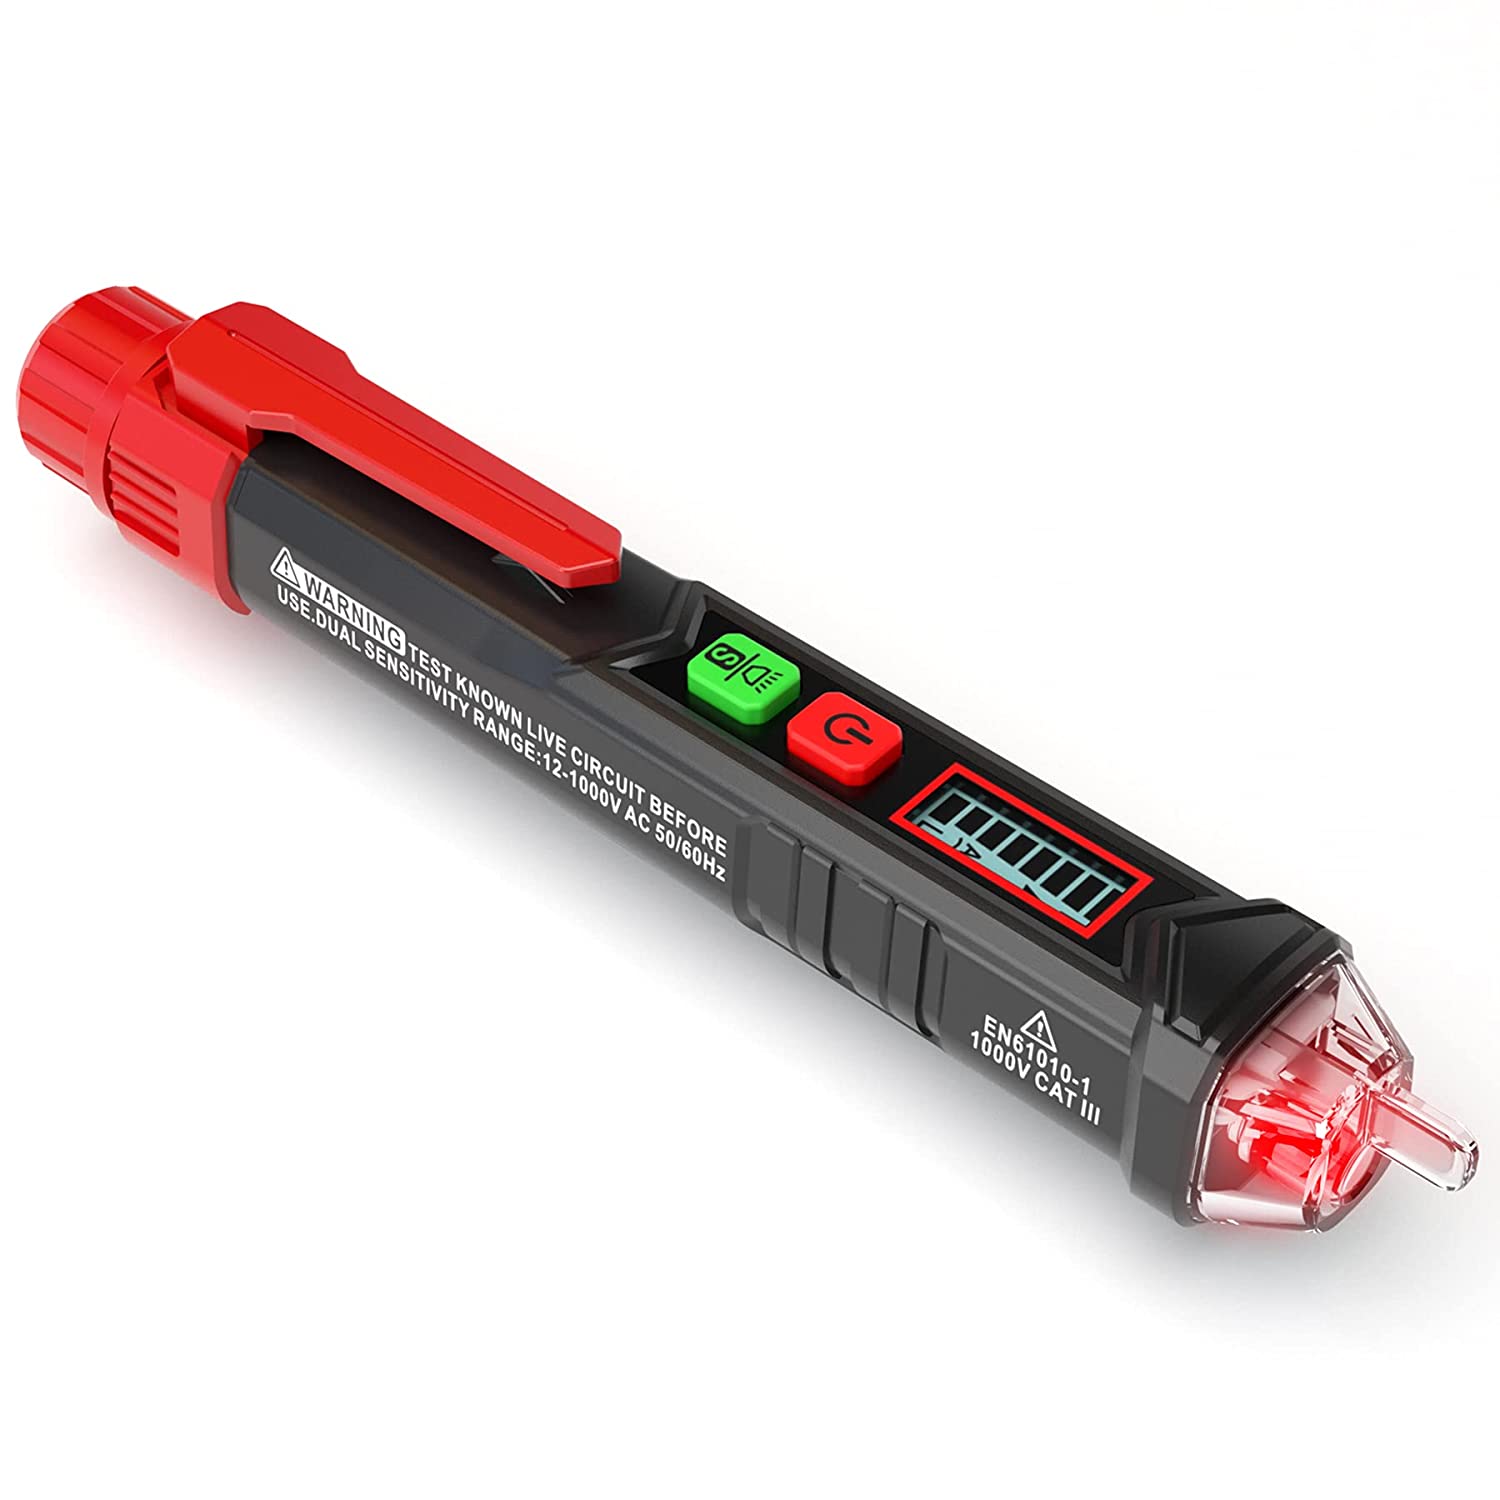 Touchless Voltage Detector Aneng VC 1010 With 2 AAA Battery